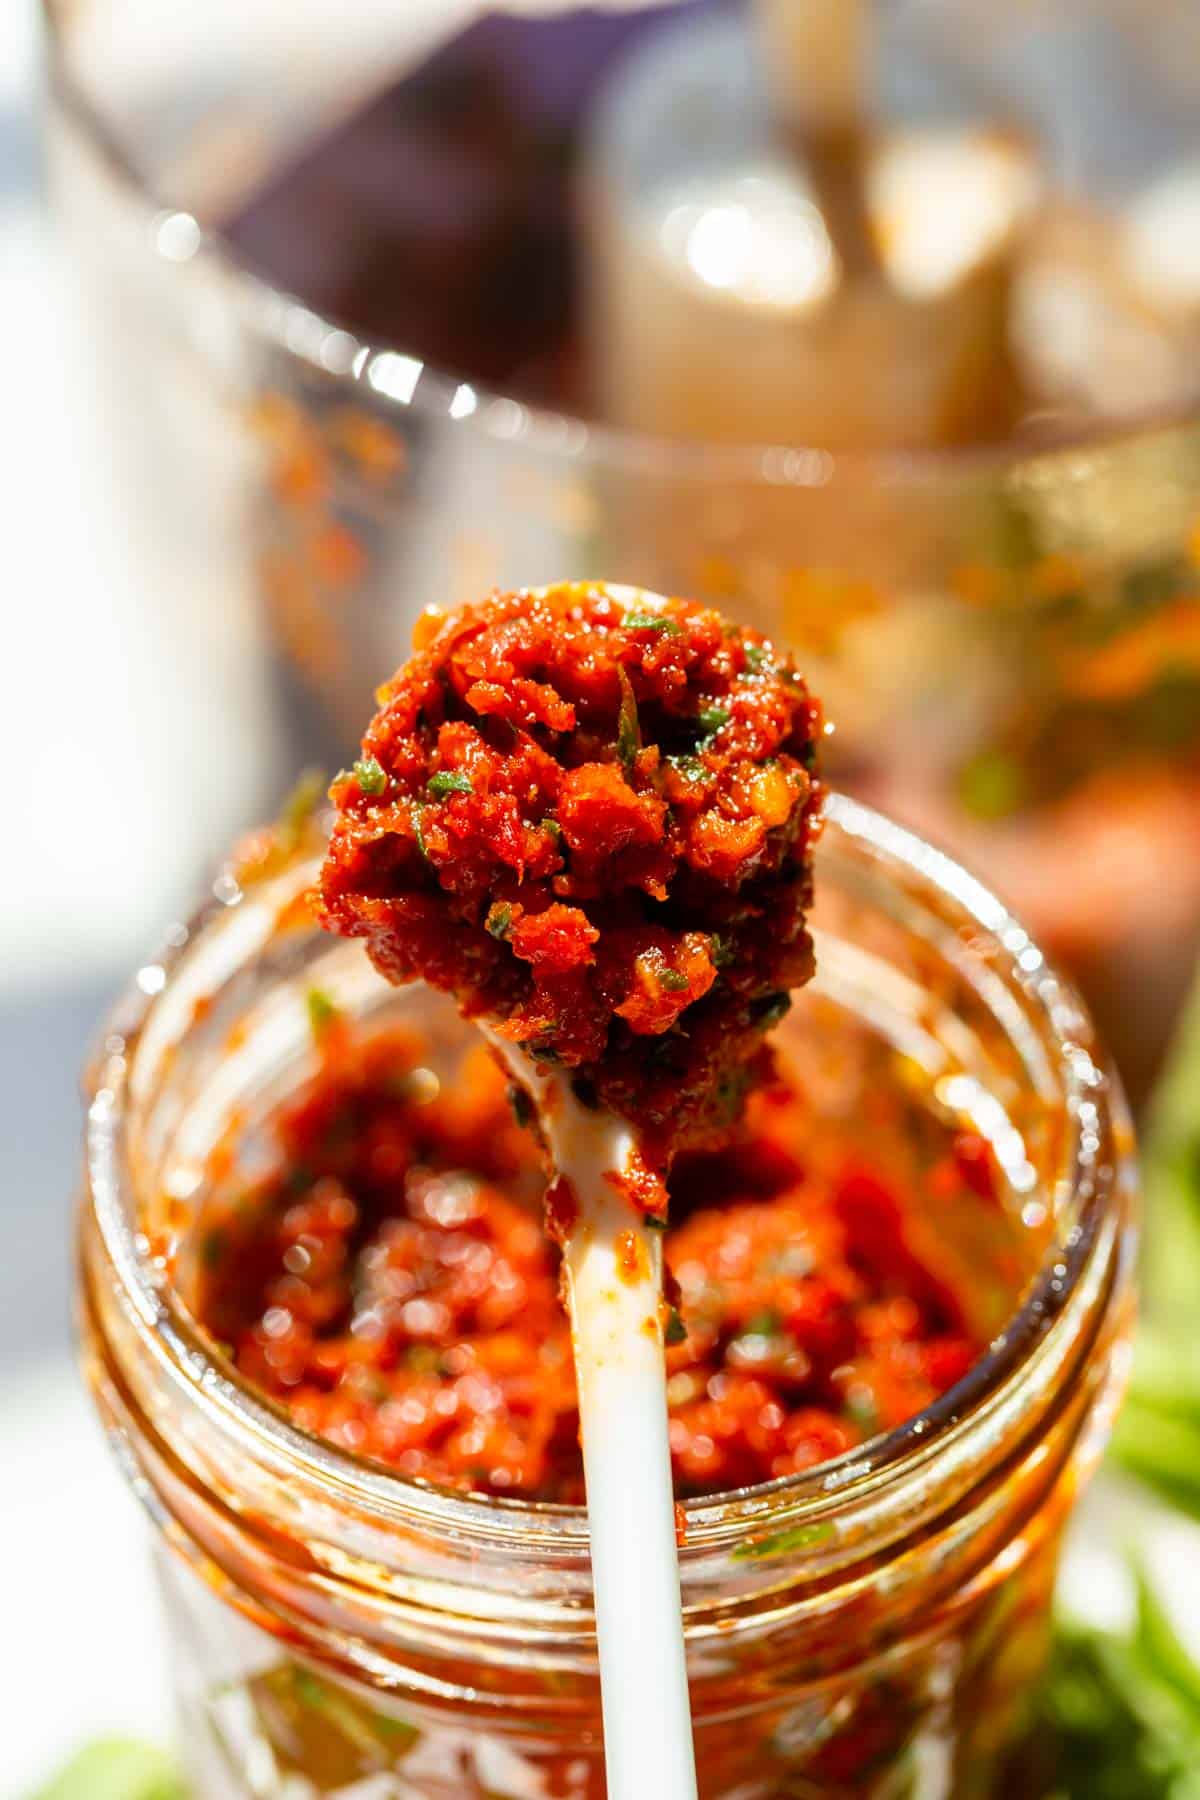 sun-dried tomato pesto is on a white spoon being lifted out of the glass jar